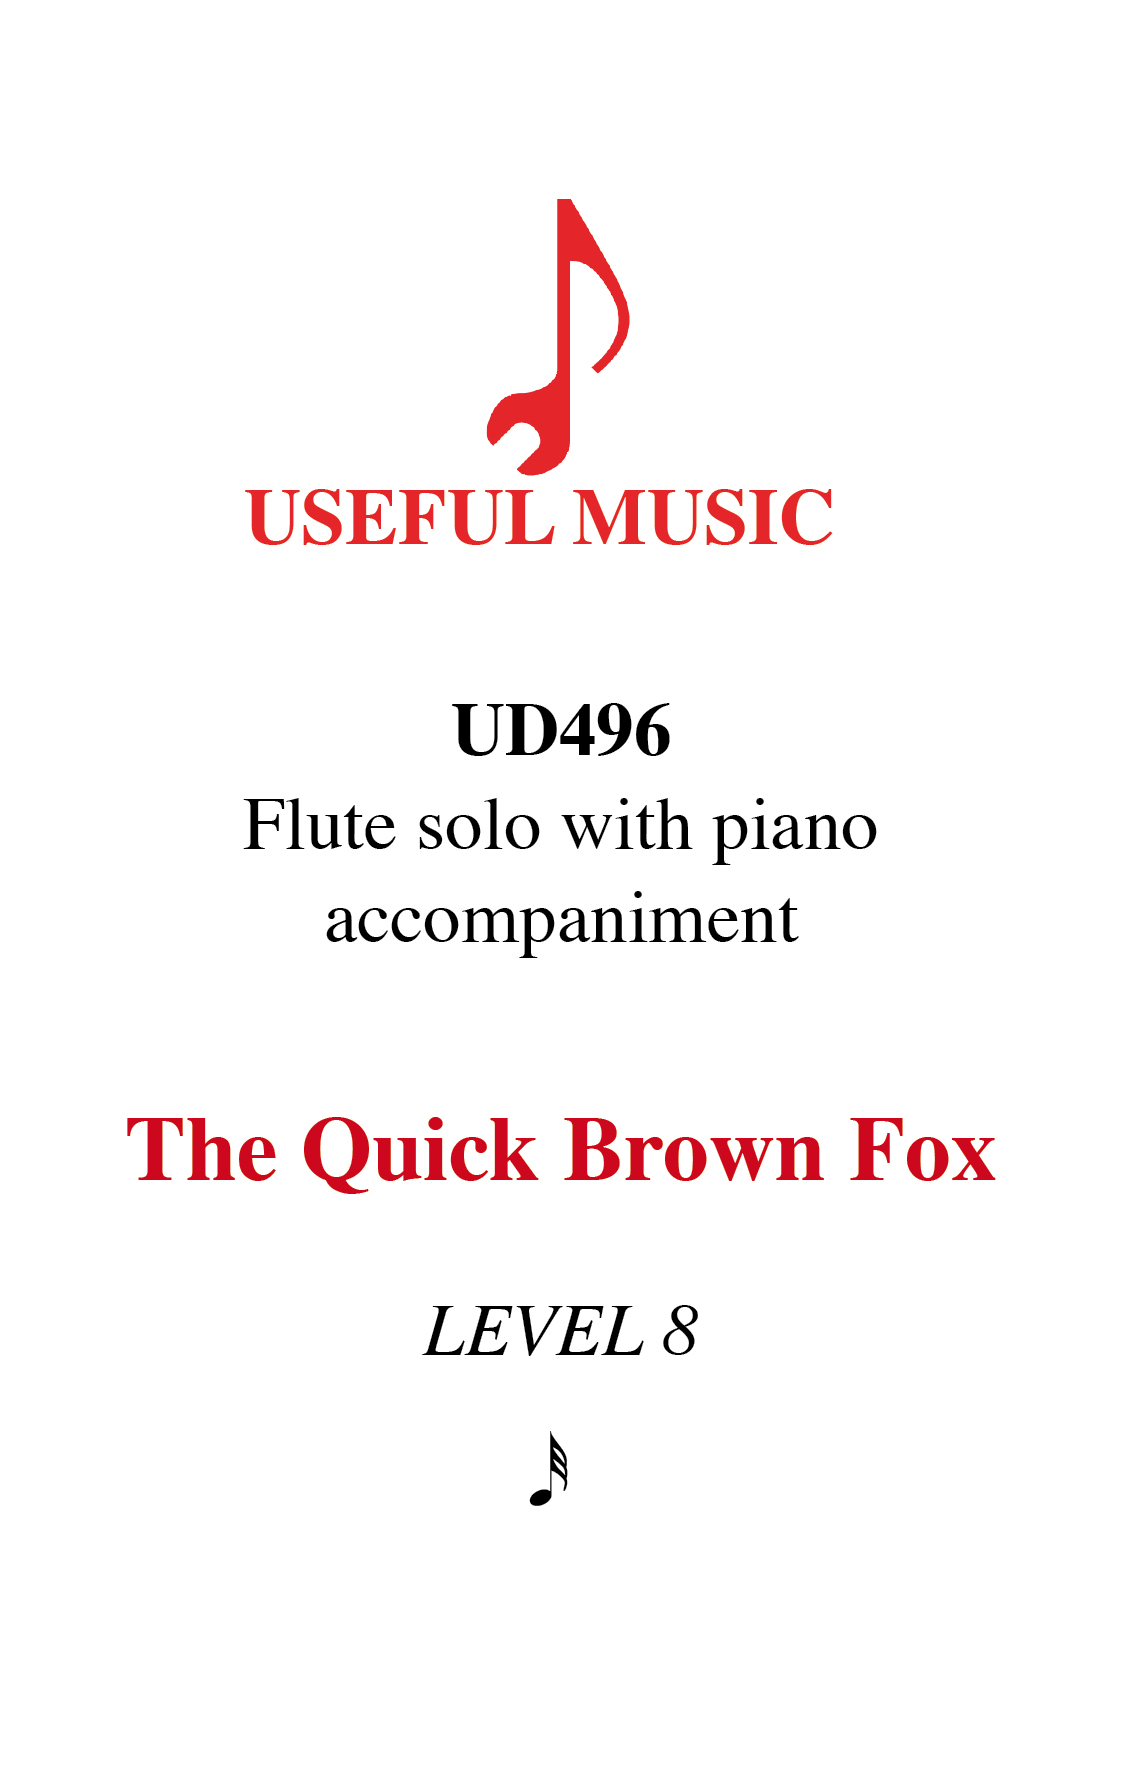 The Quick Brown Fox - flute with piano accompaniment